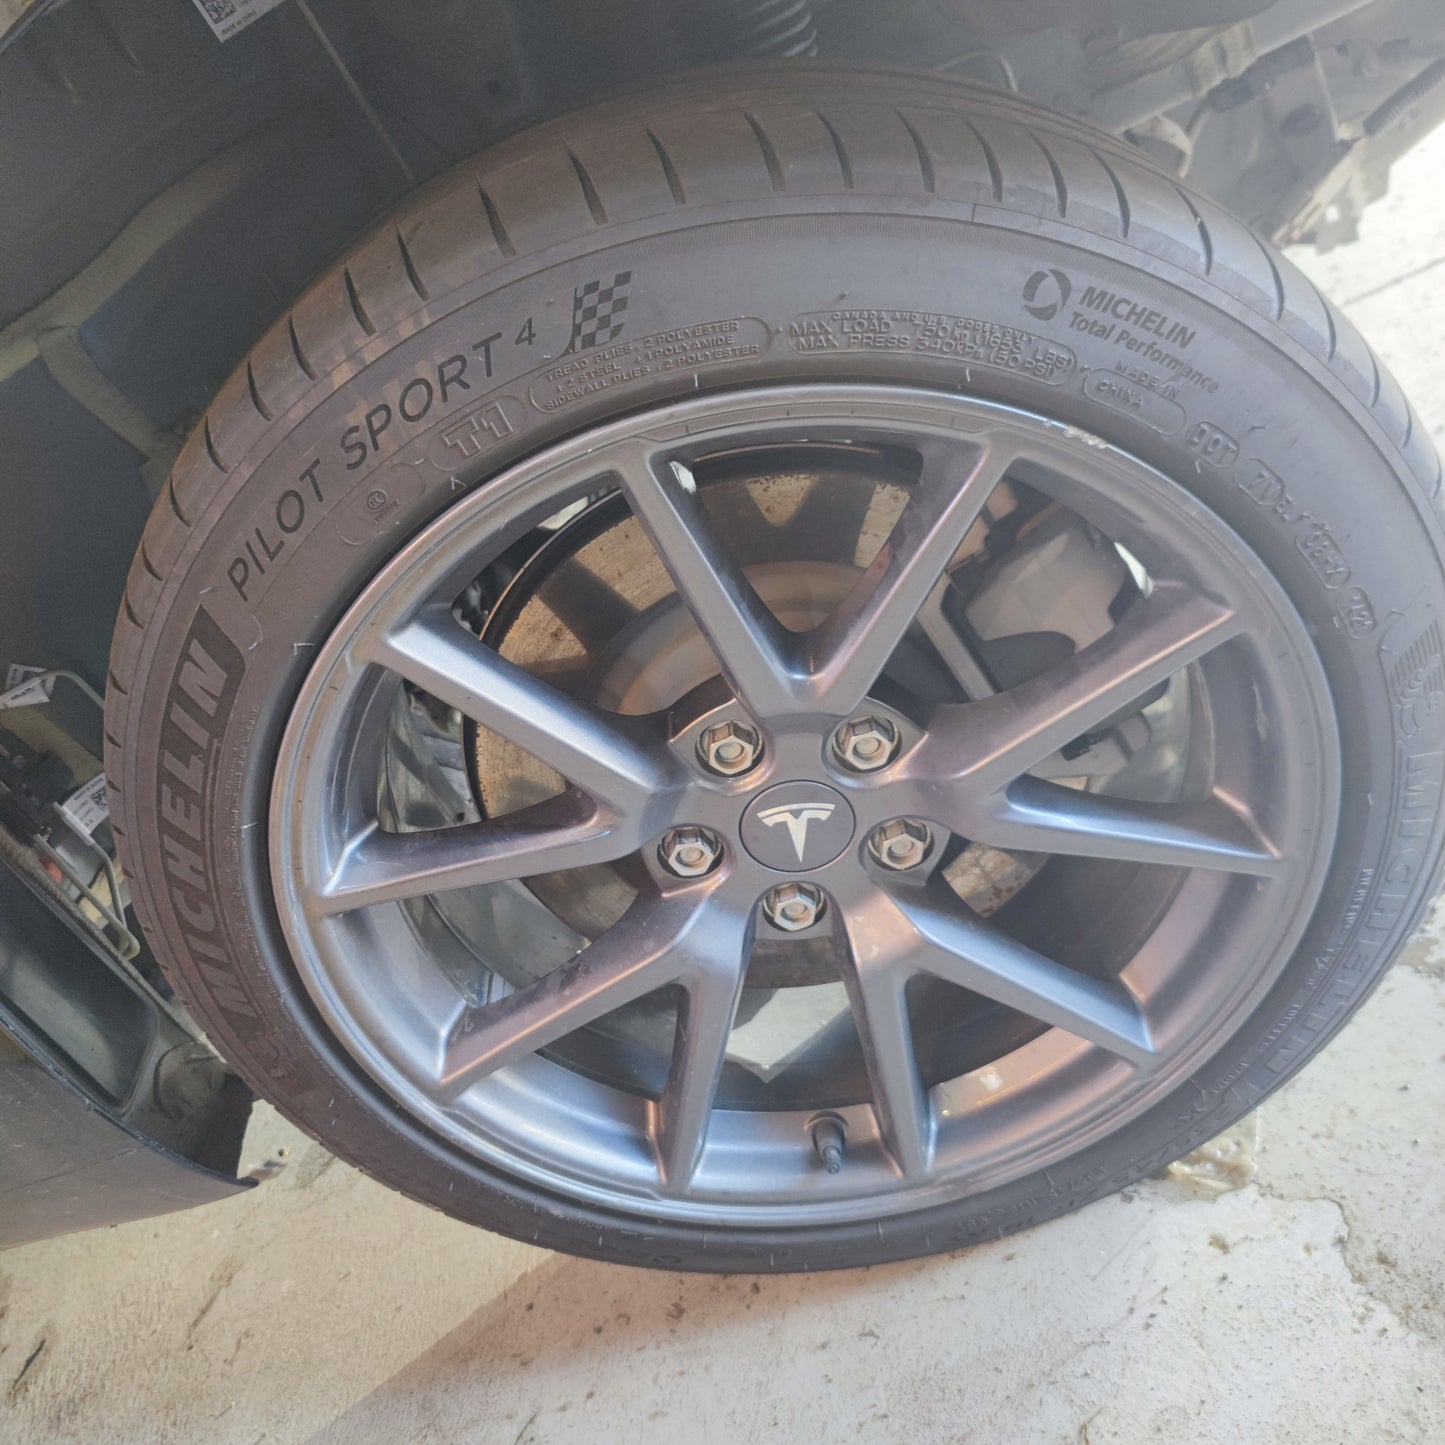 Set of 4 18" Rims and Tyres